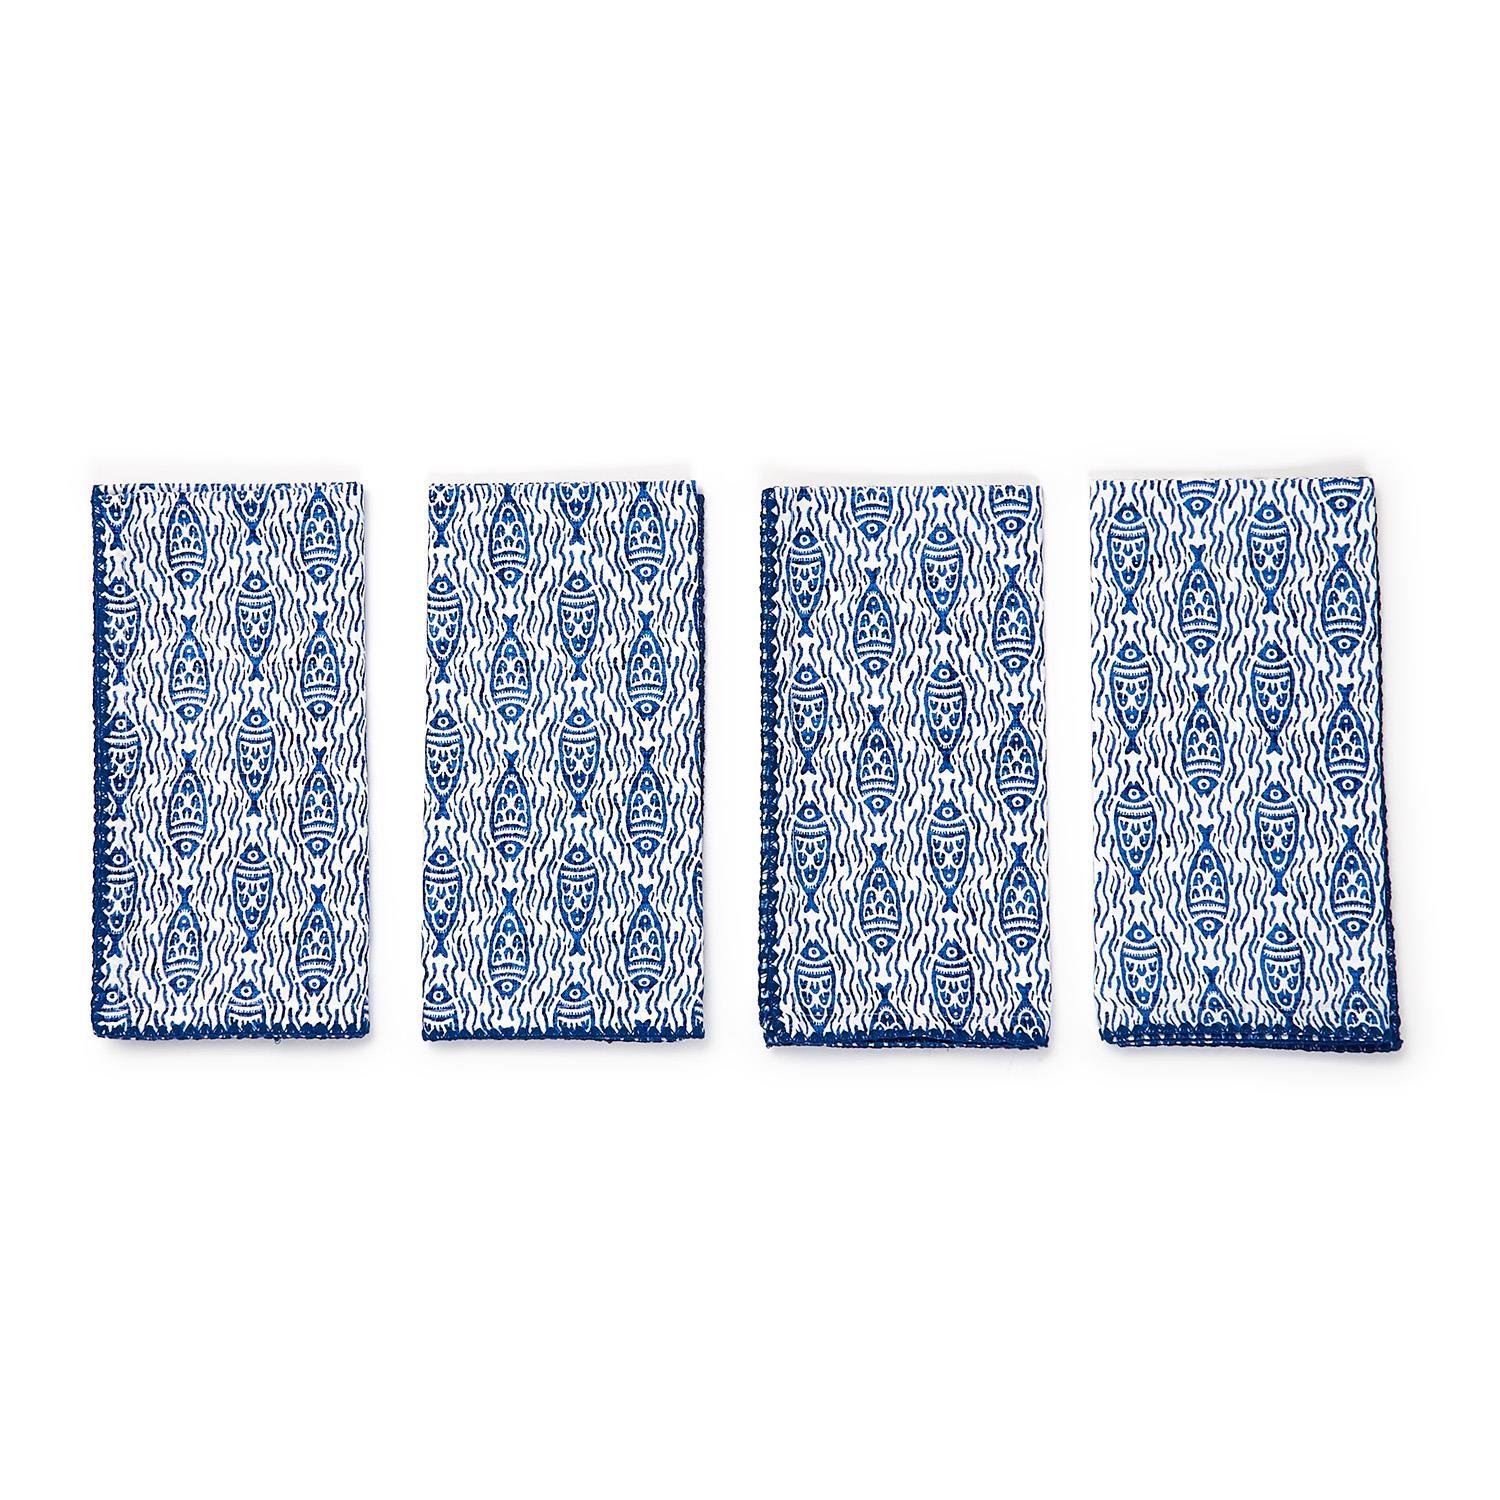 43095 - Blue Fish Napkins - Set of 4 (2) - $38/each - Purchased (1)